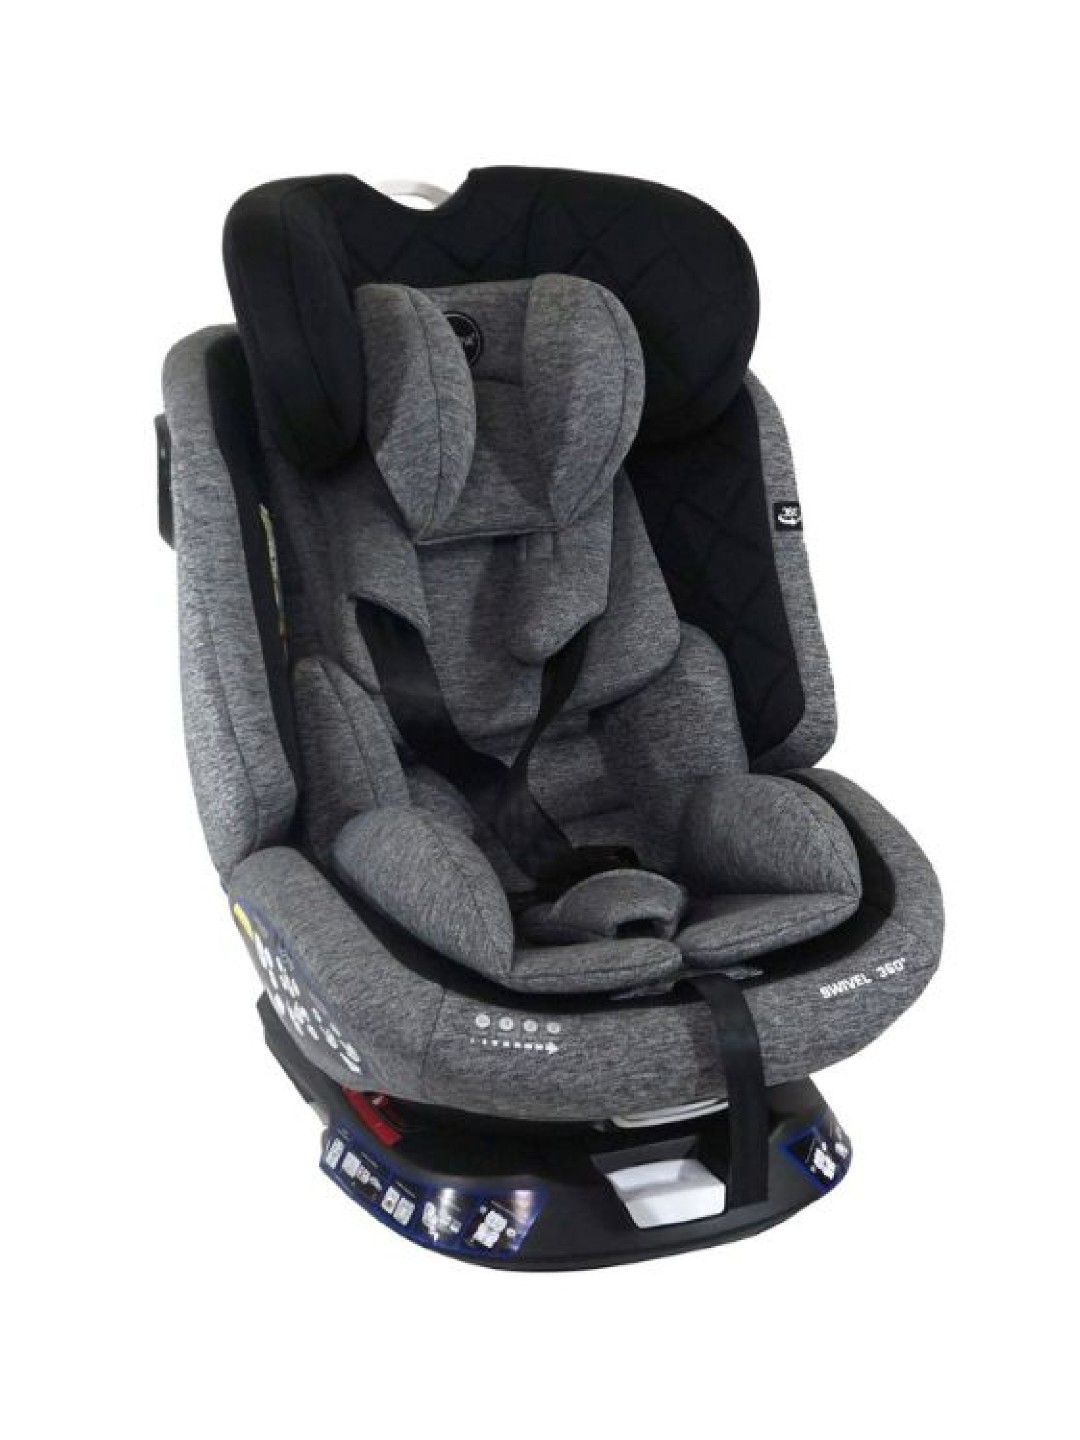 Akeeva 360 Rotate Isofix Carseat w/ Latch and Side Protect (Swivel) w/ ICC - Grey